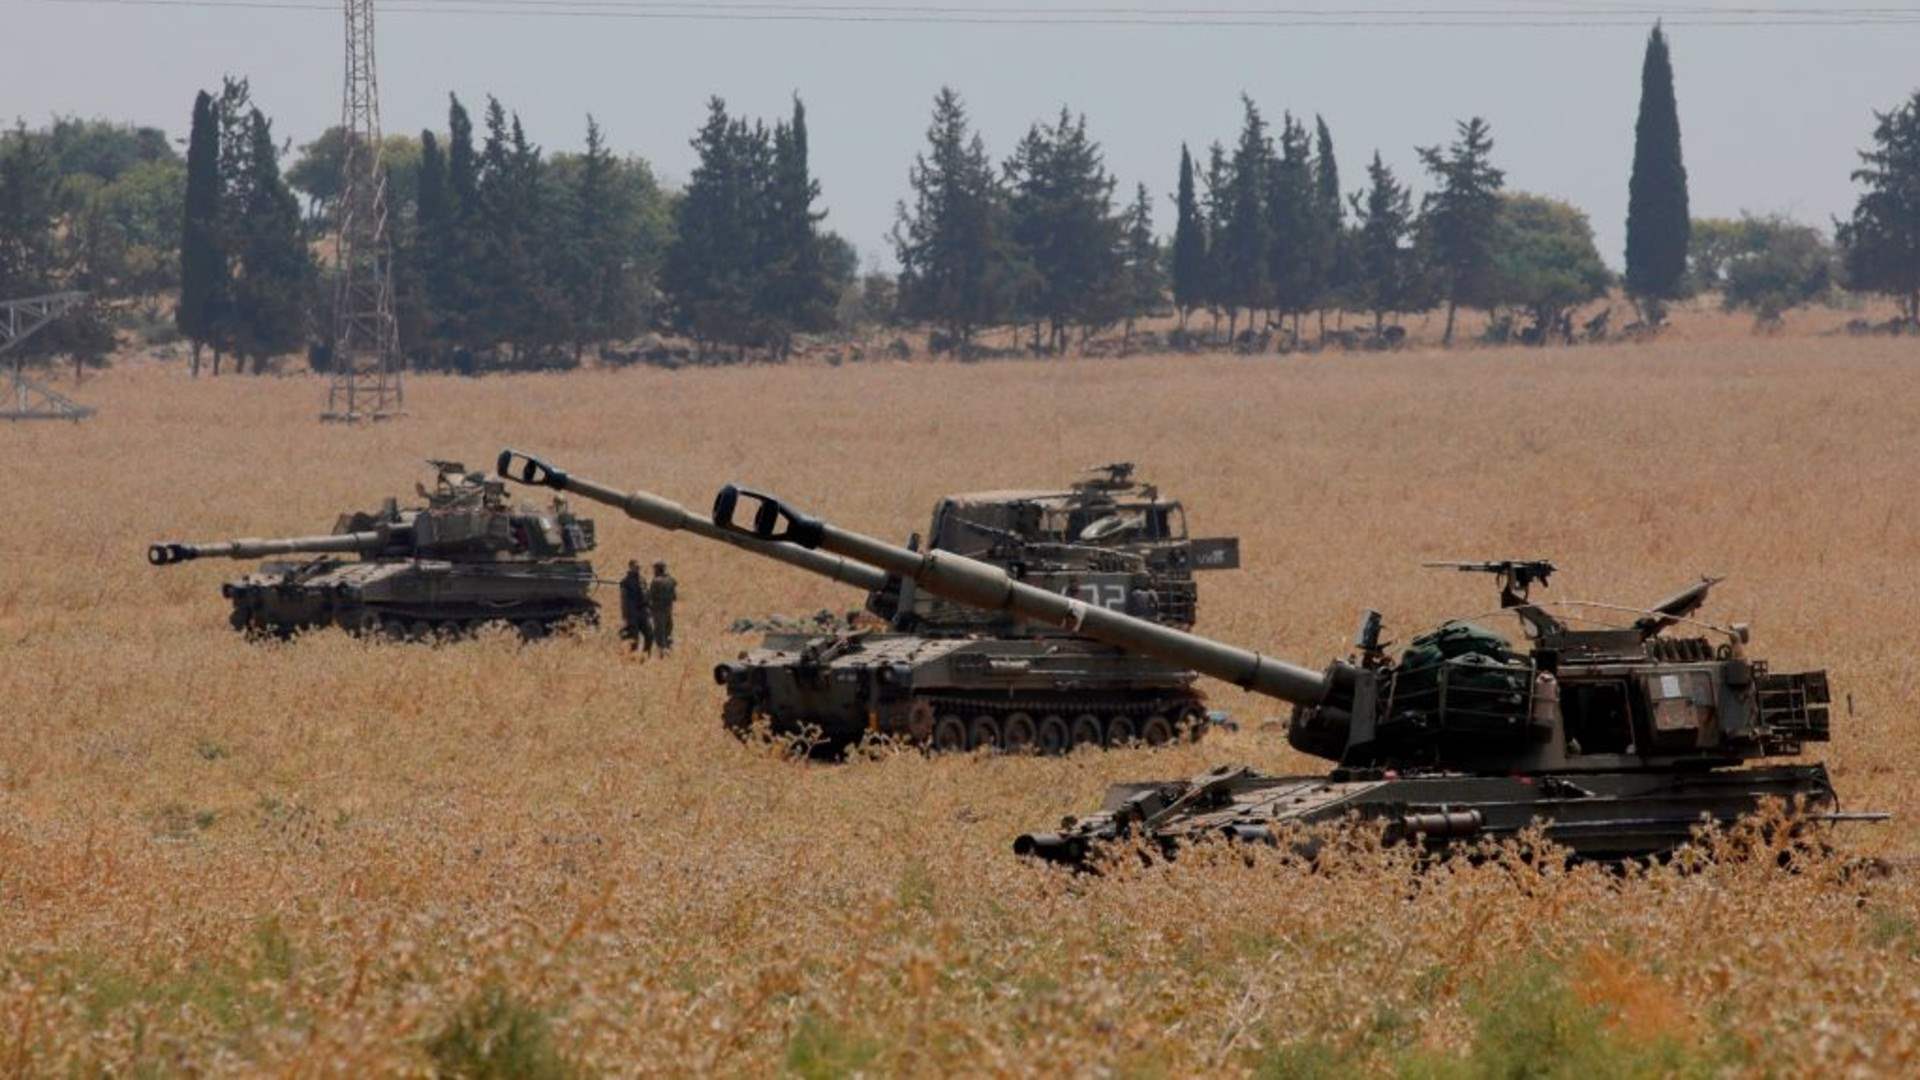 Israeli Army targets sites in southern Lebanon